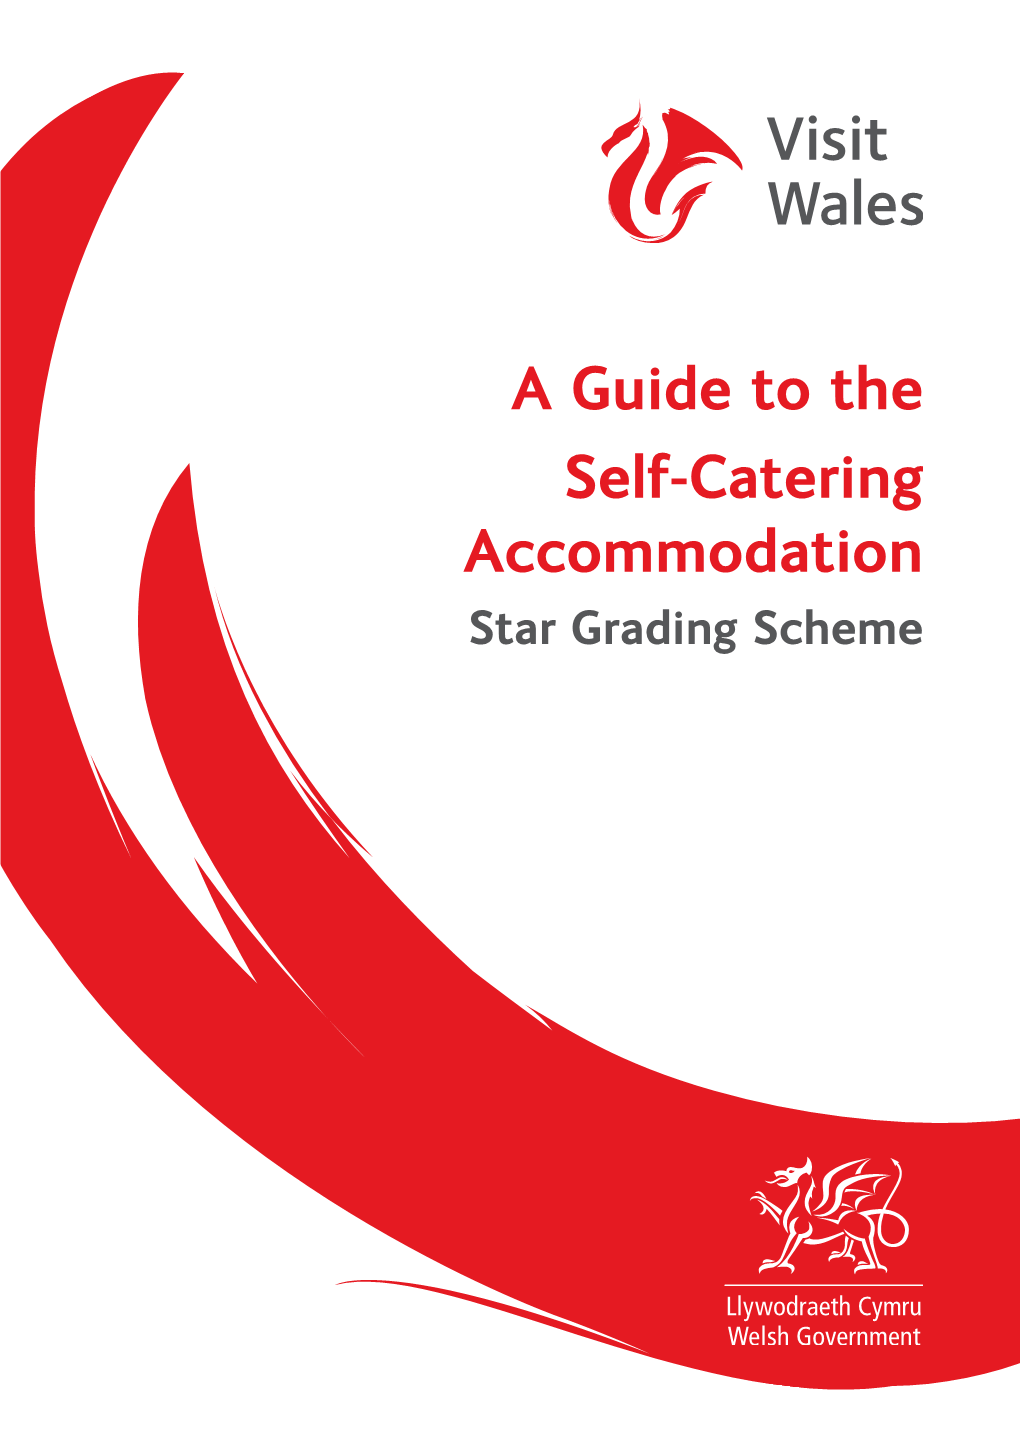 A Guide to the Self-Catering Accommodation Star Grading Scheme